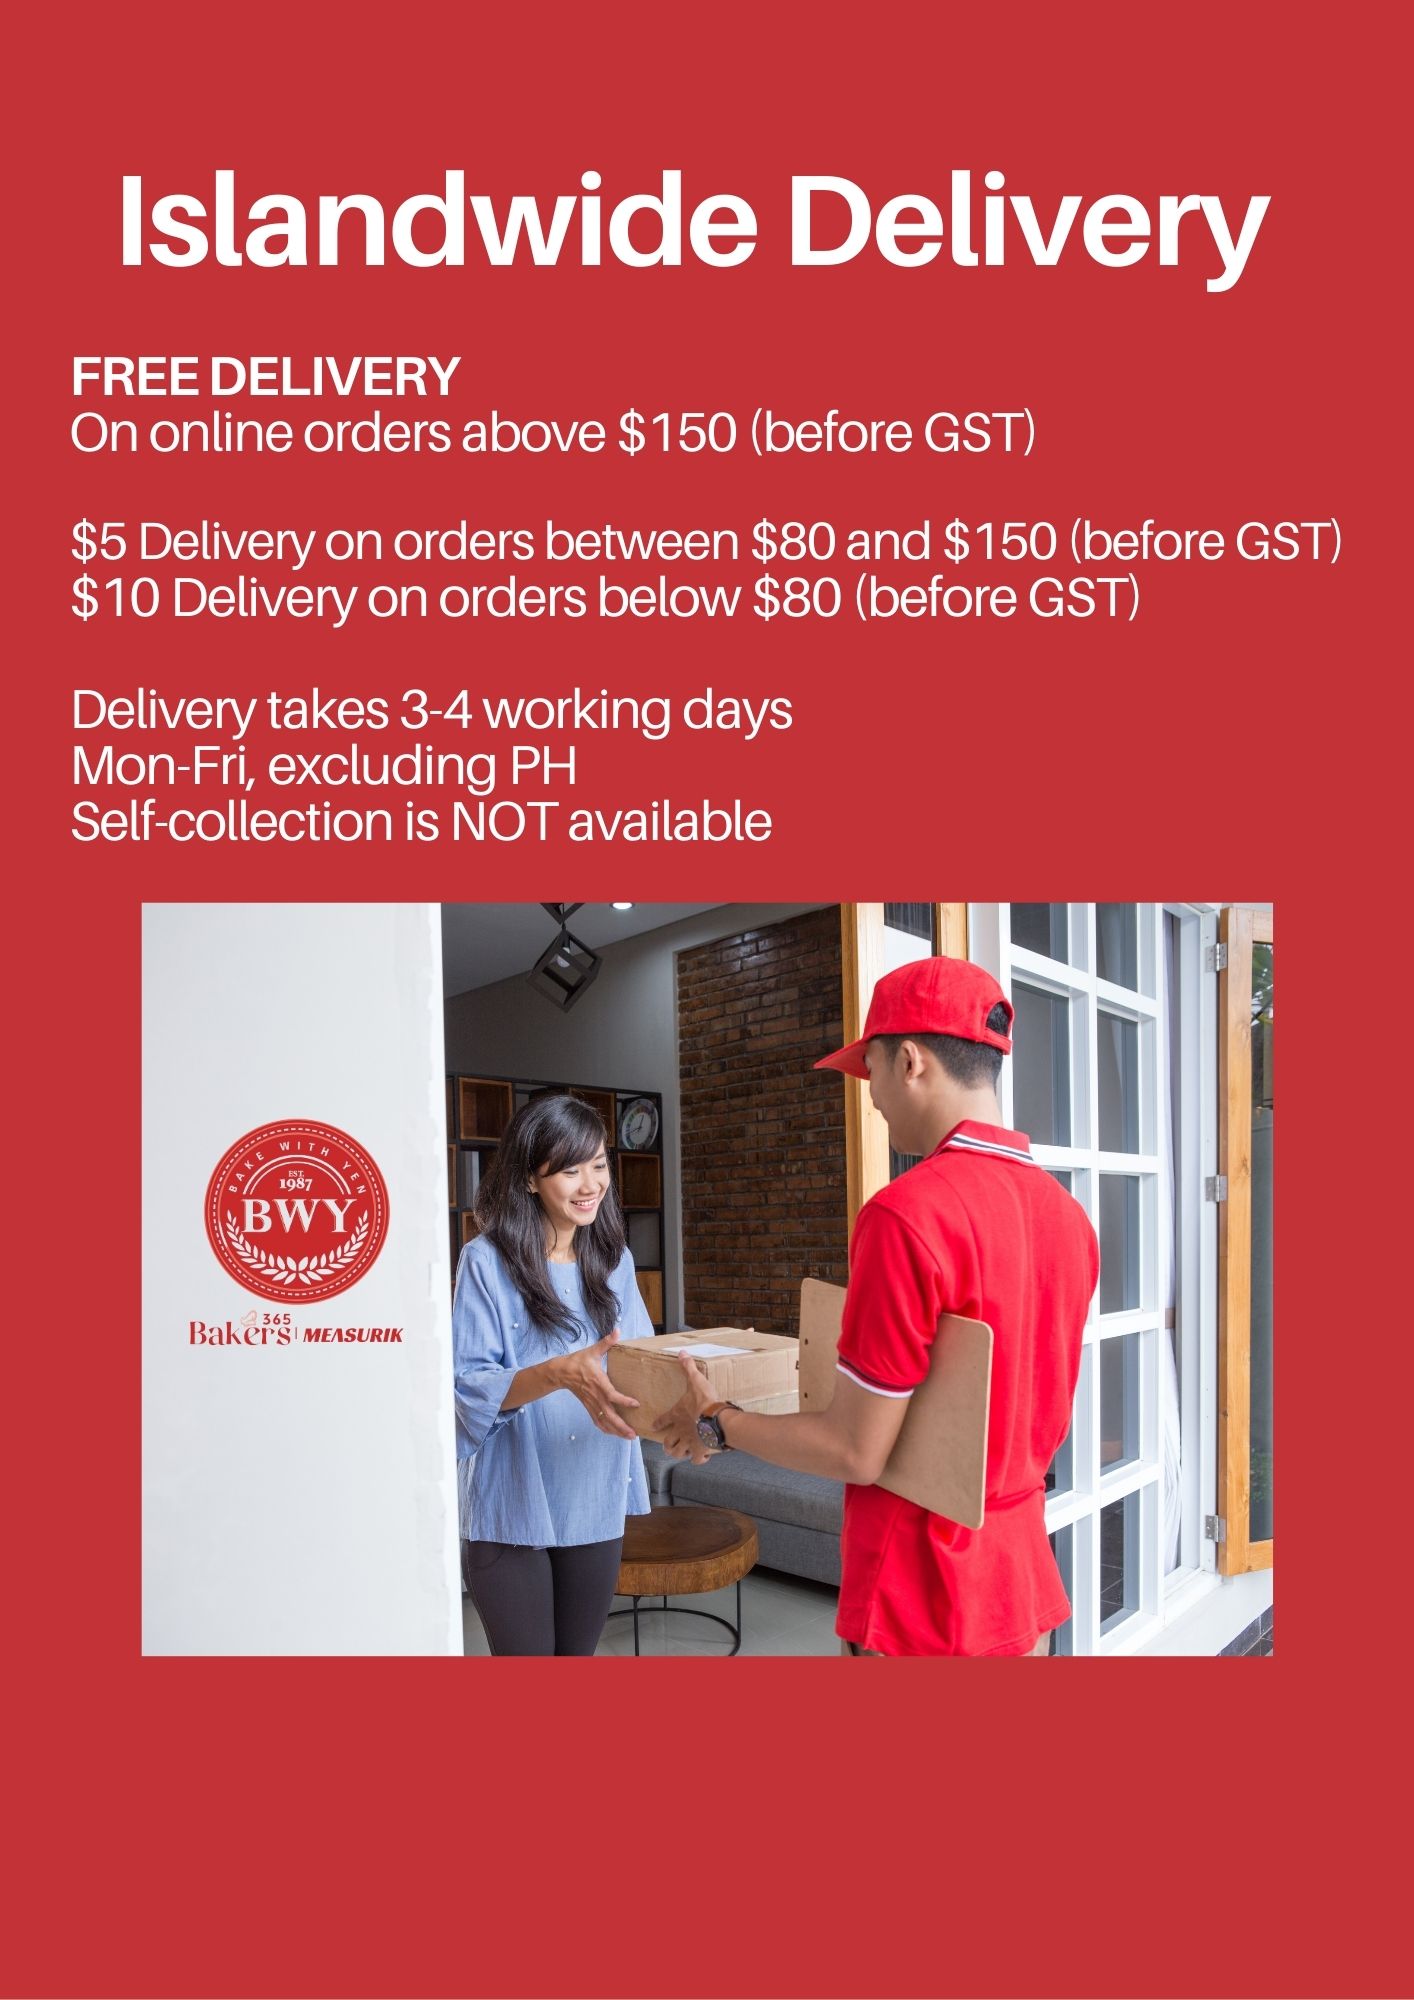 BWY Islandwide delivery _1_